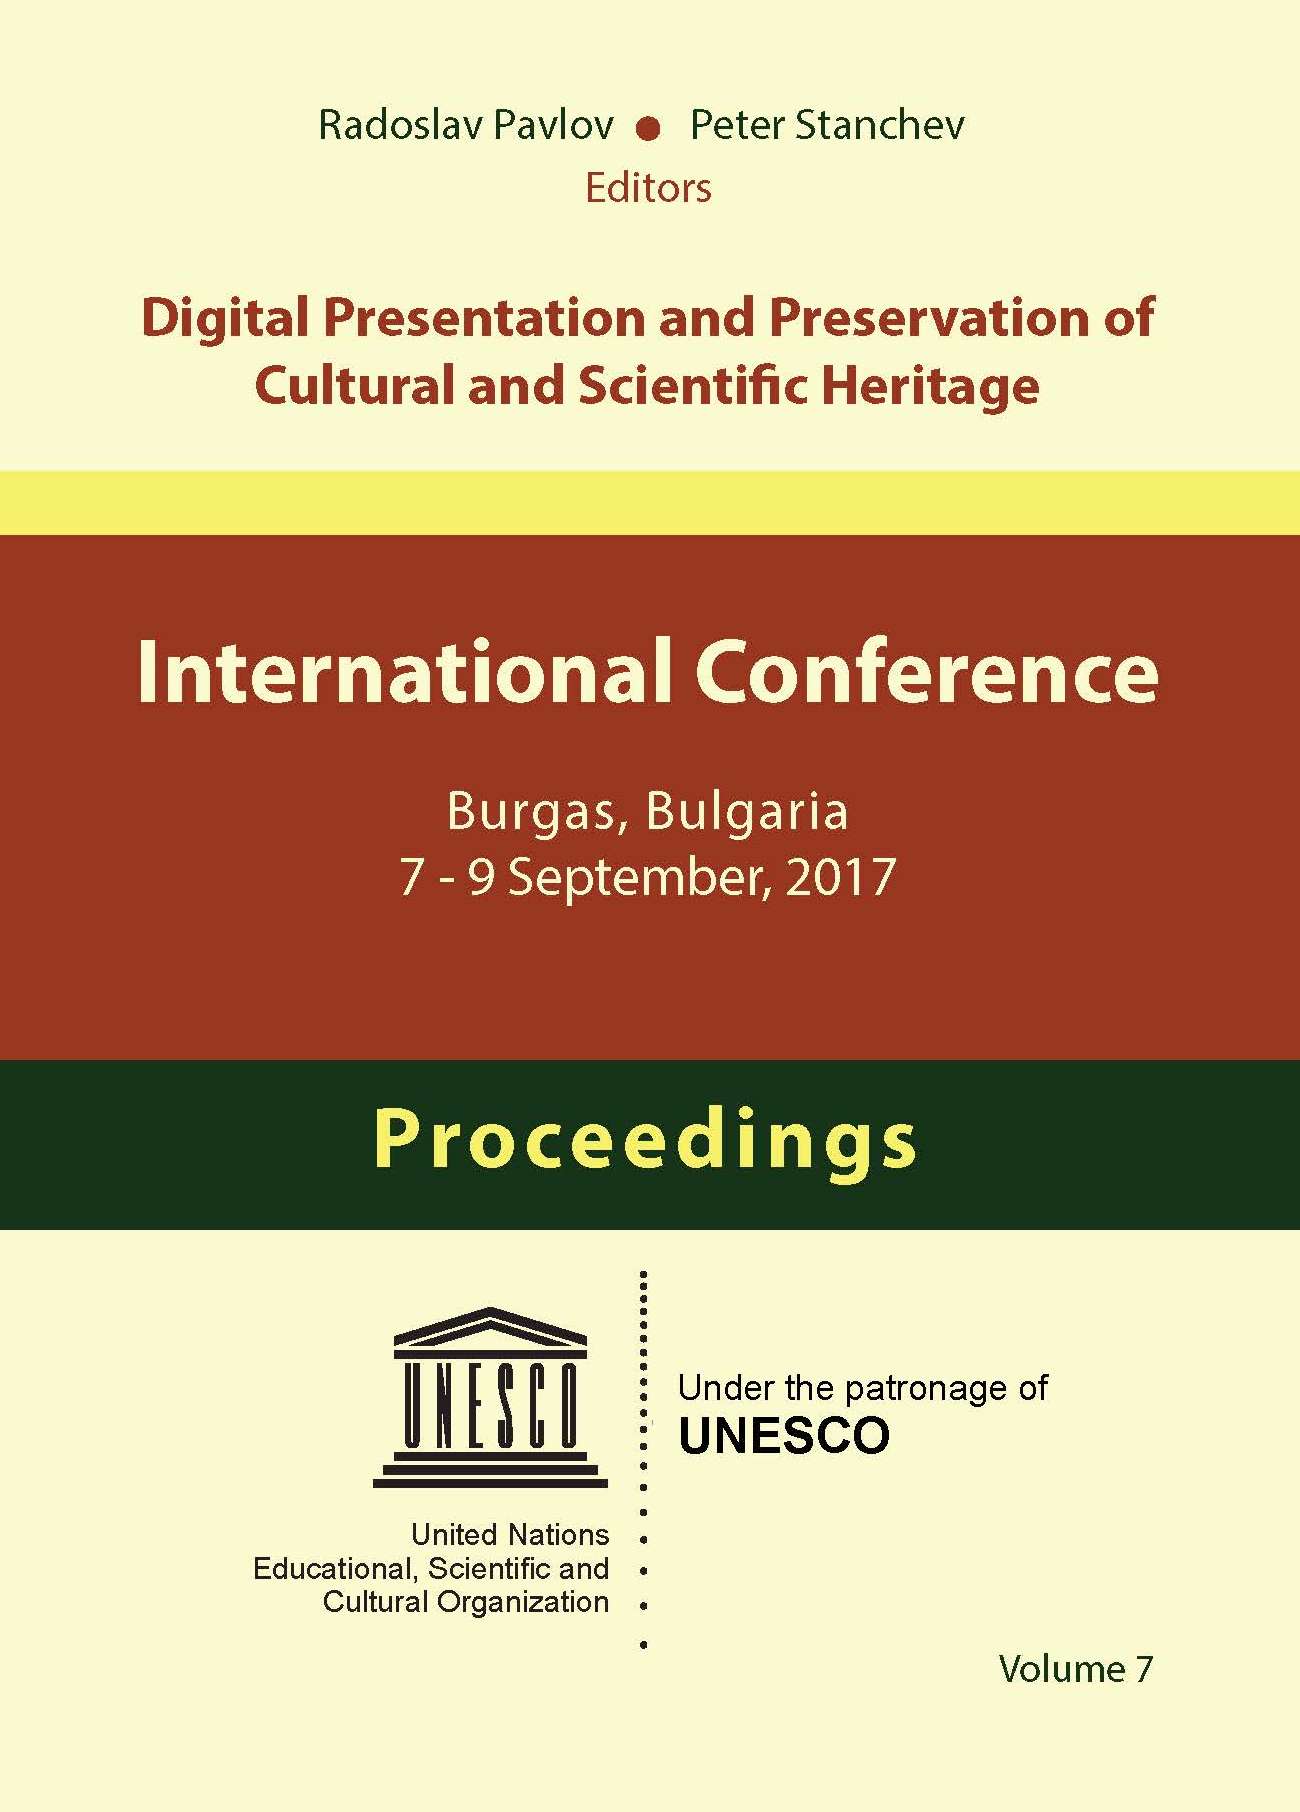 Digital Presentation and Preservation of Cultural and Scientific Heritage